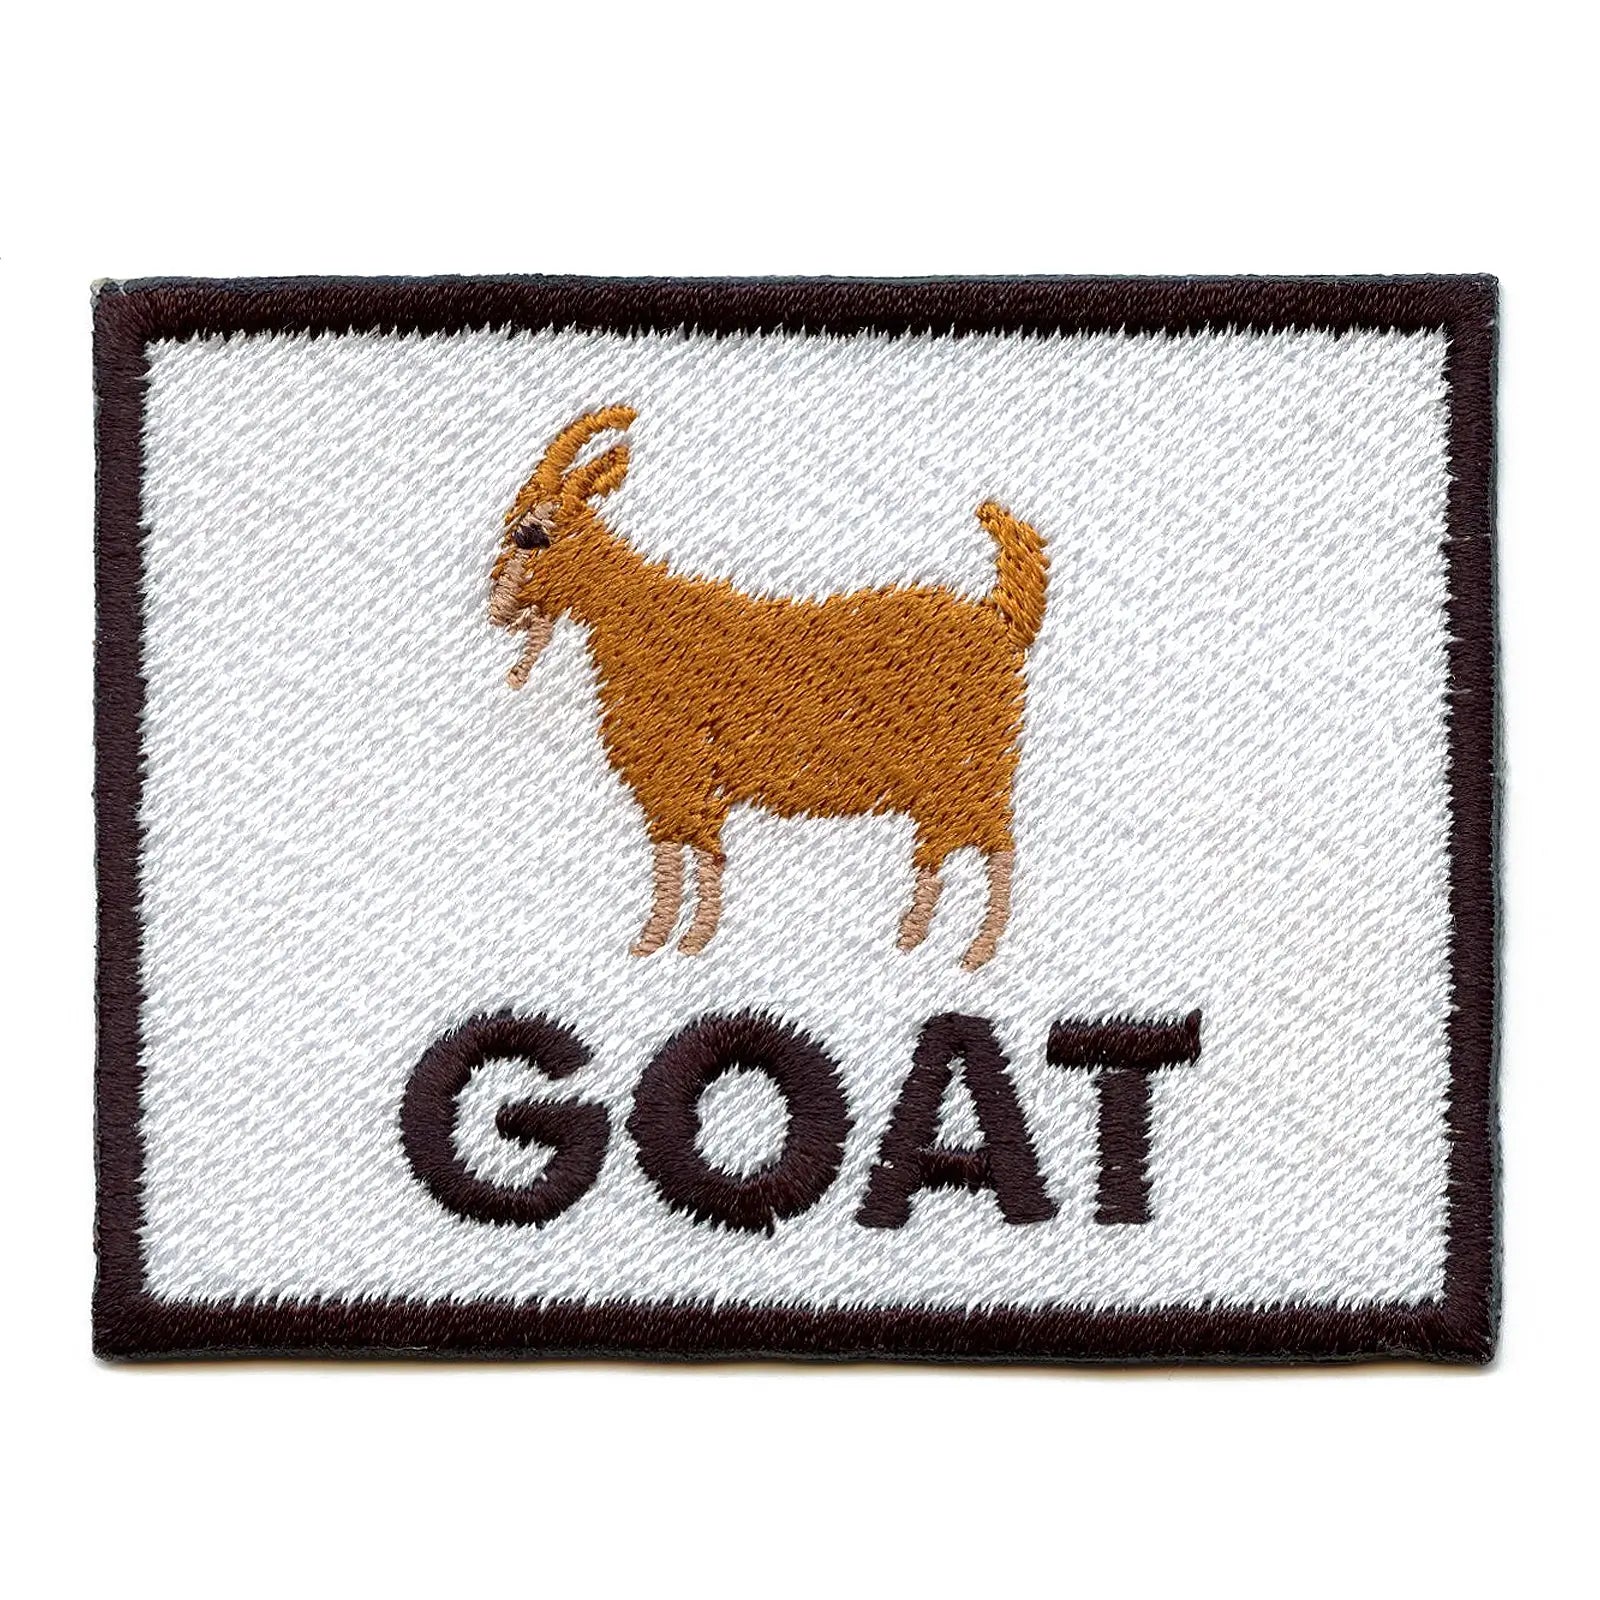 GOAT Box Logo Embroidered Iron On Patch 